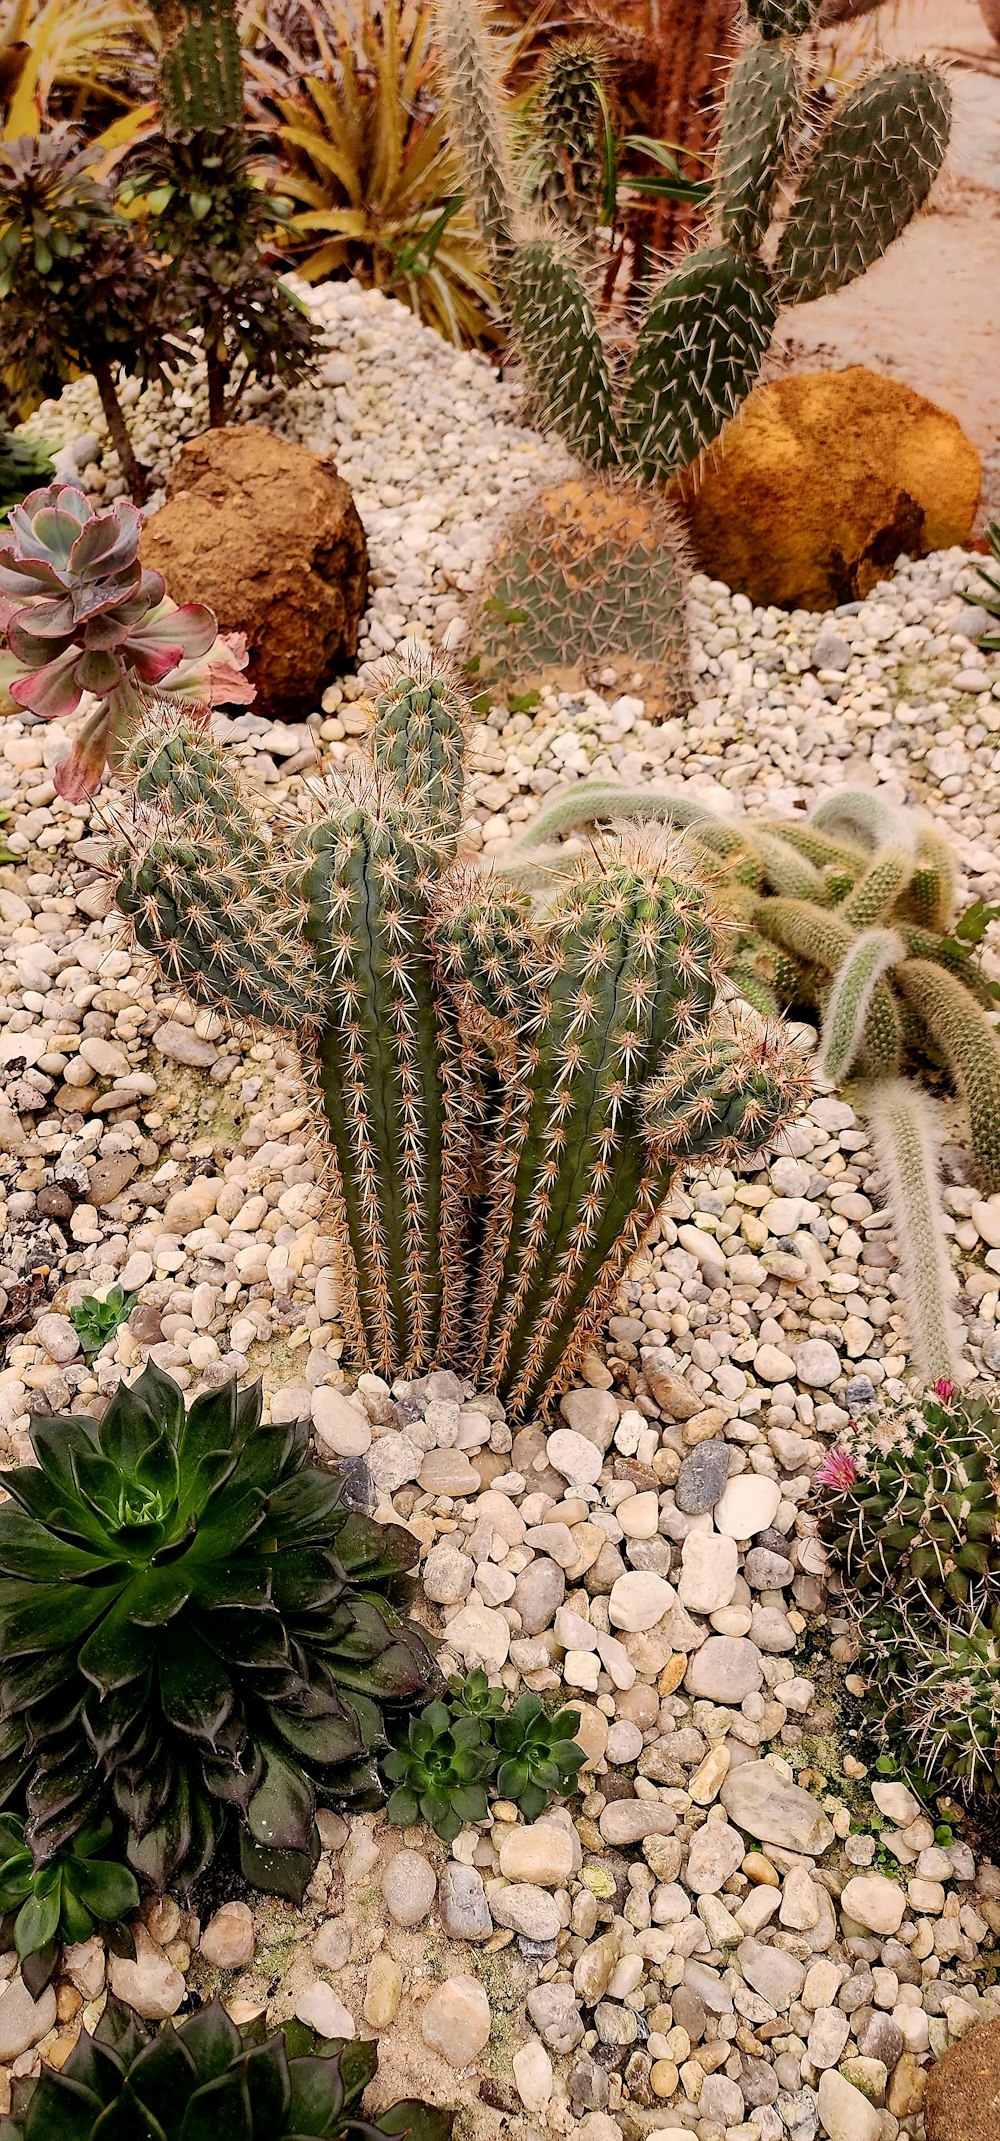 a group of cactus in a rocky area